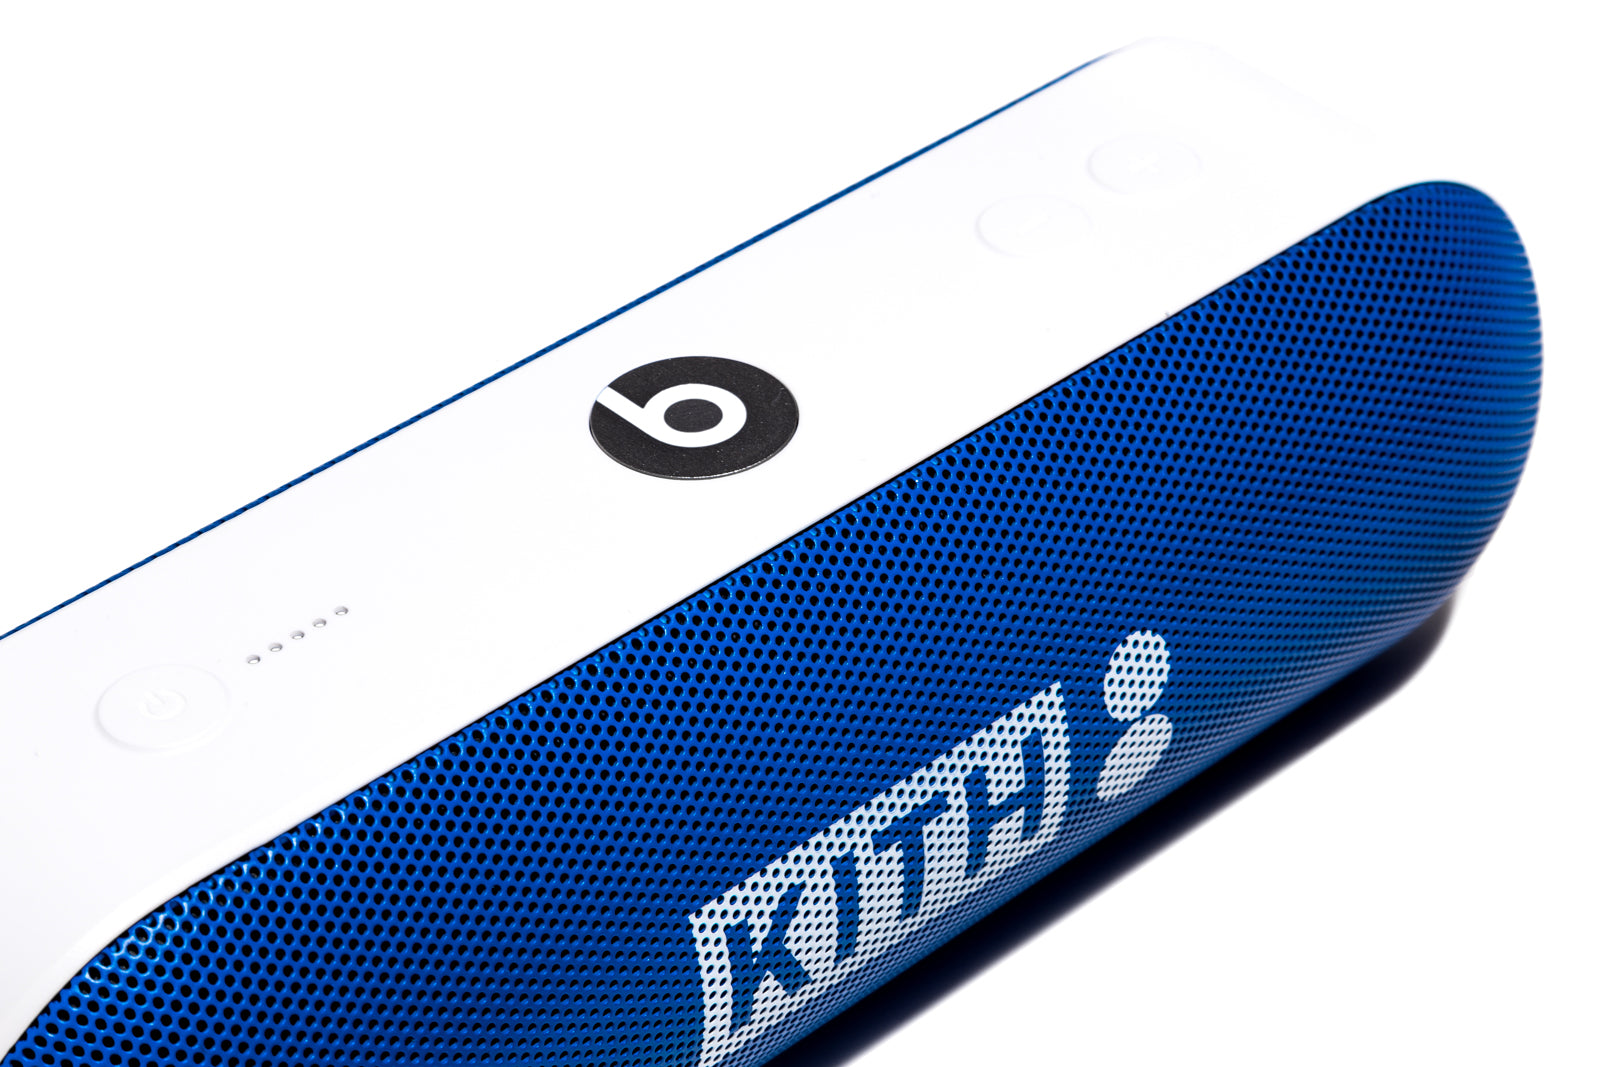 Kith x Colette x Beats by Dre Pill+ 